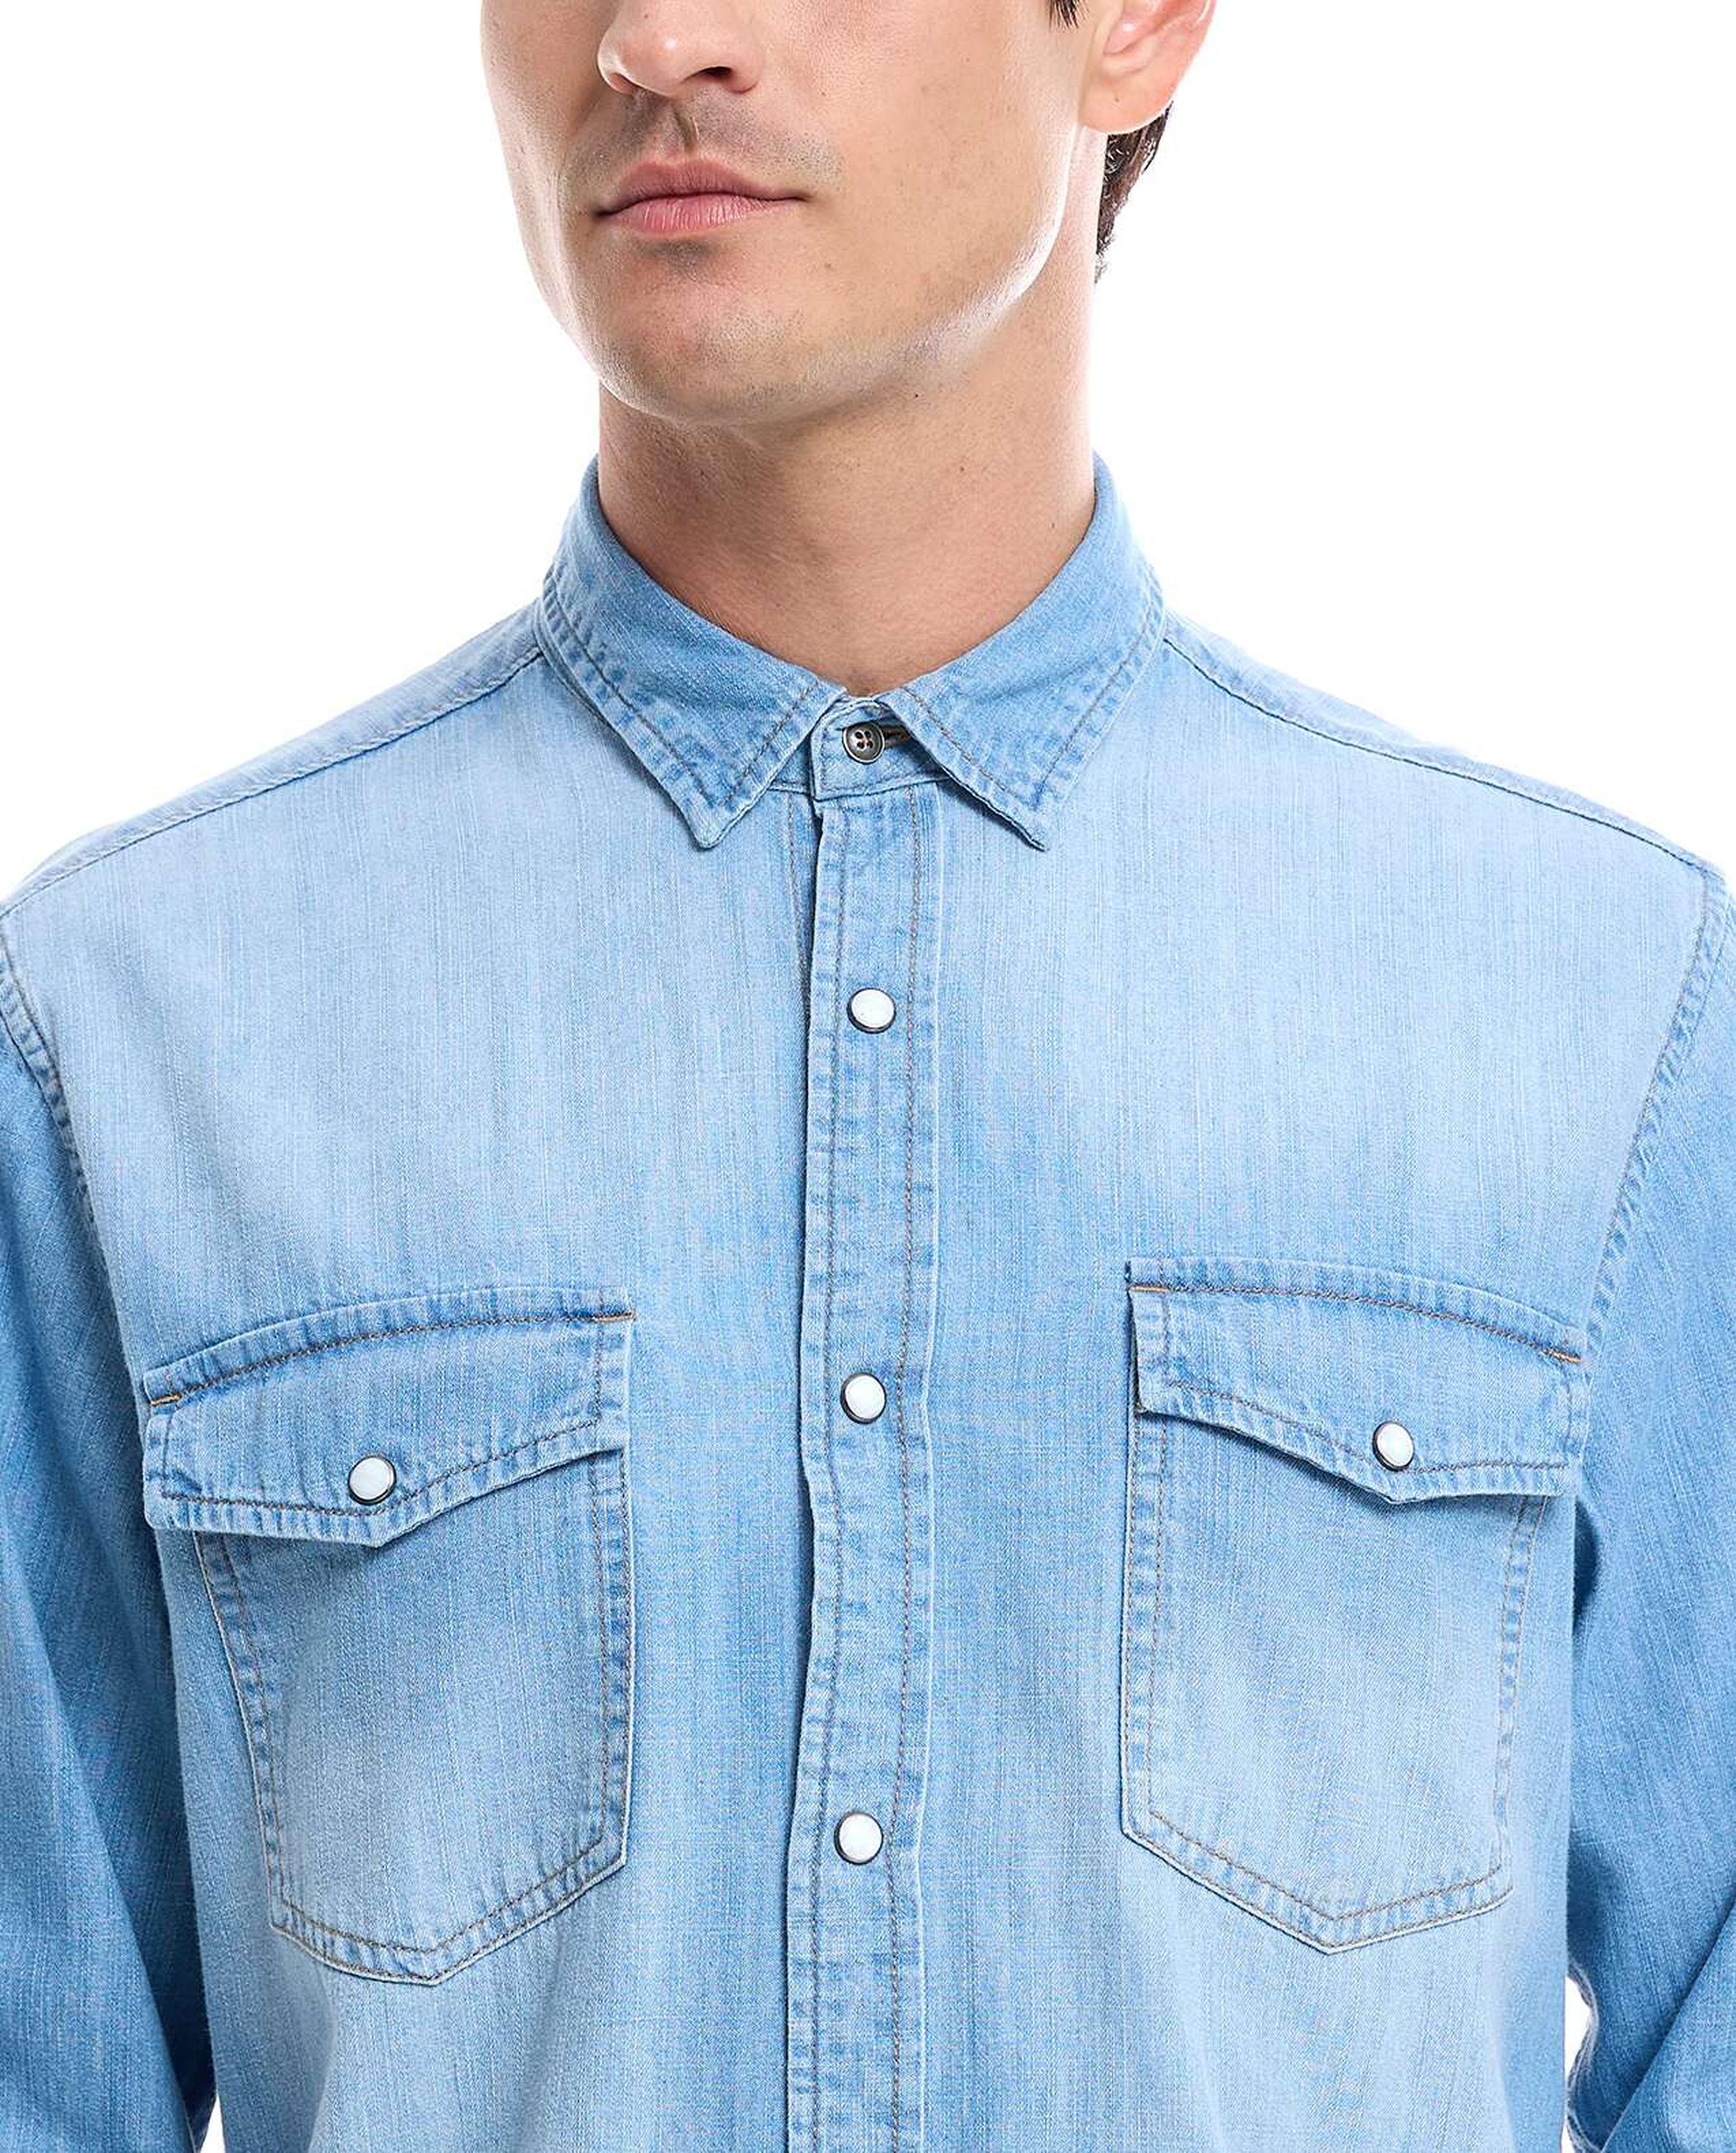 Faded Denim Shirt with Classic Collar and Long Sleeves